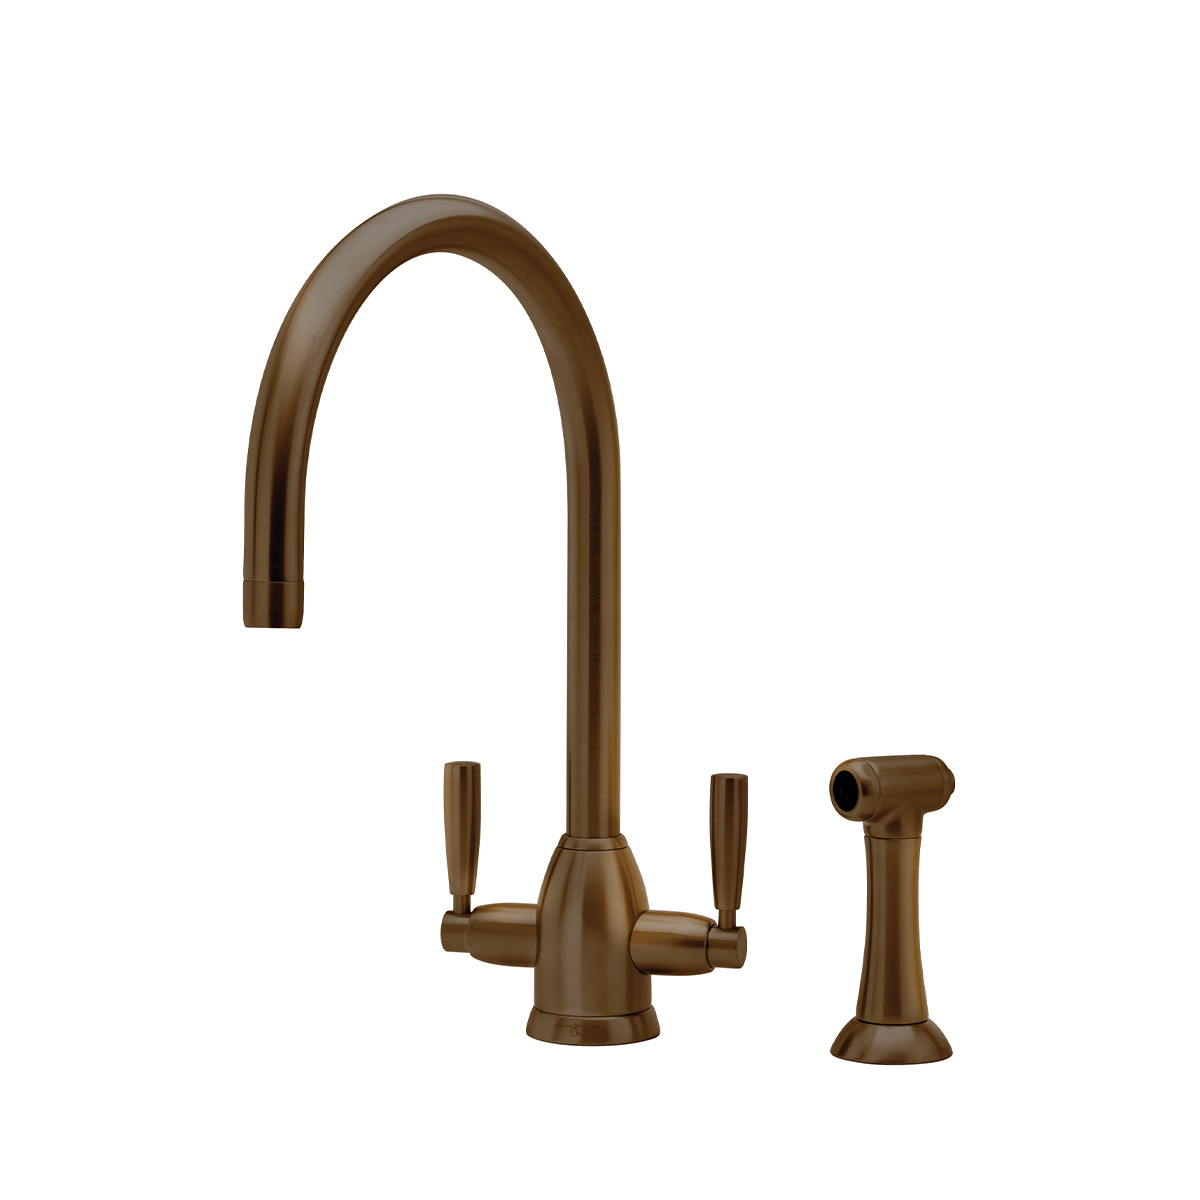 Shaws by Perrin & Rowe Silverdale kitchen mixer with spray rinse in English Bronze. Oberon style kitchen mixer AUSH.4866. Distributed in Australia by Luxe by Design, Brisbane.